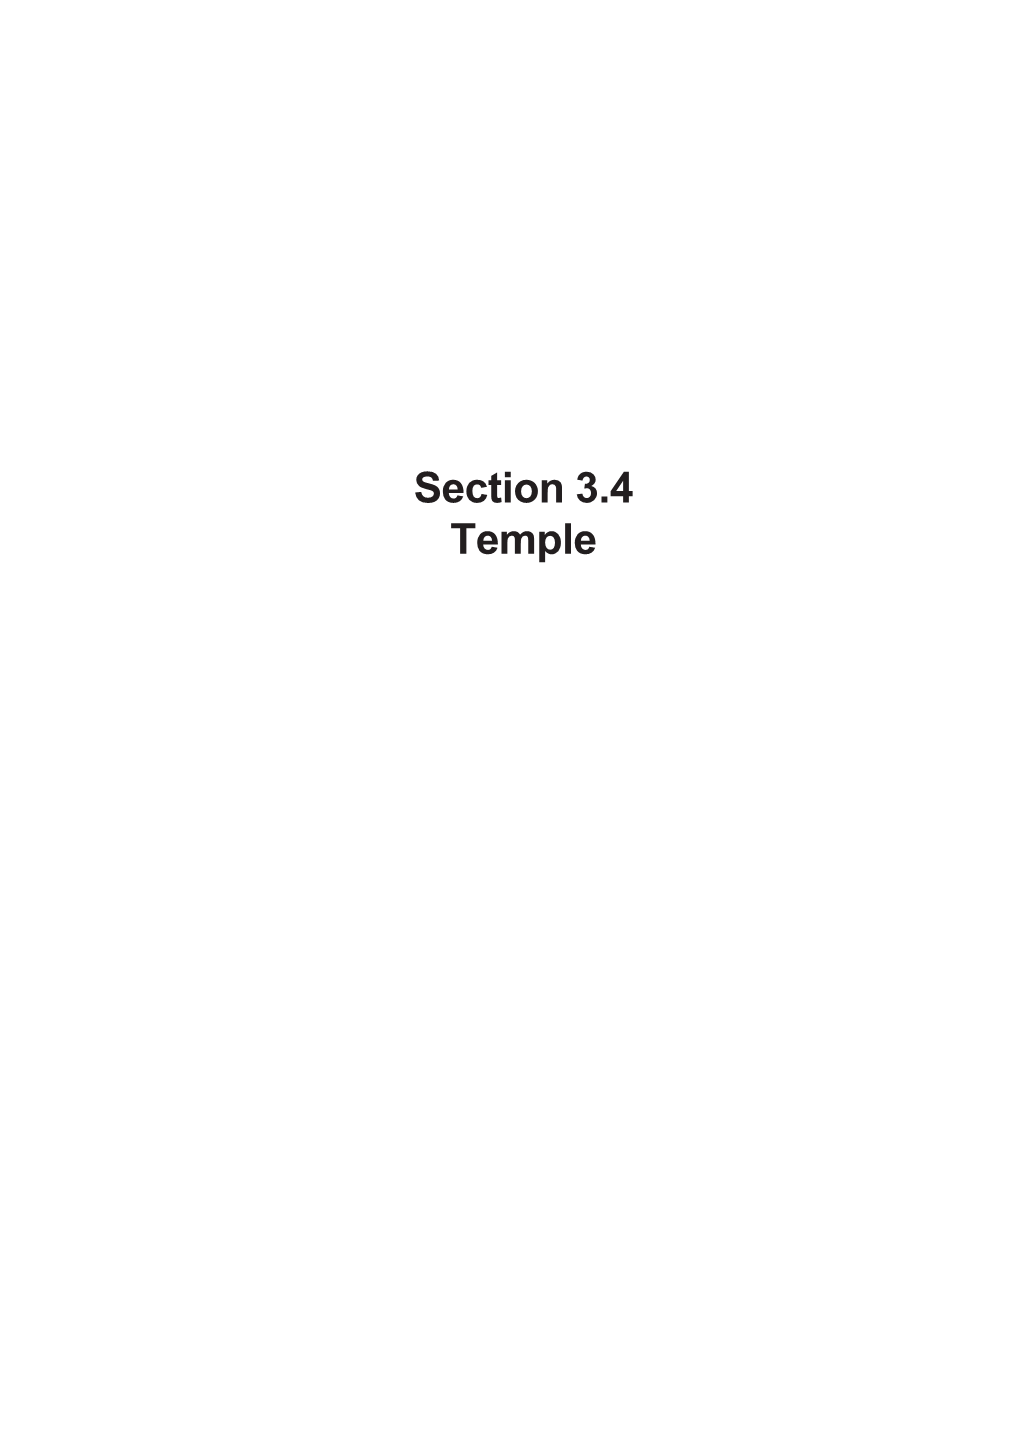 Section 3.4 Temple